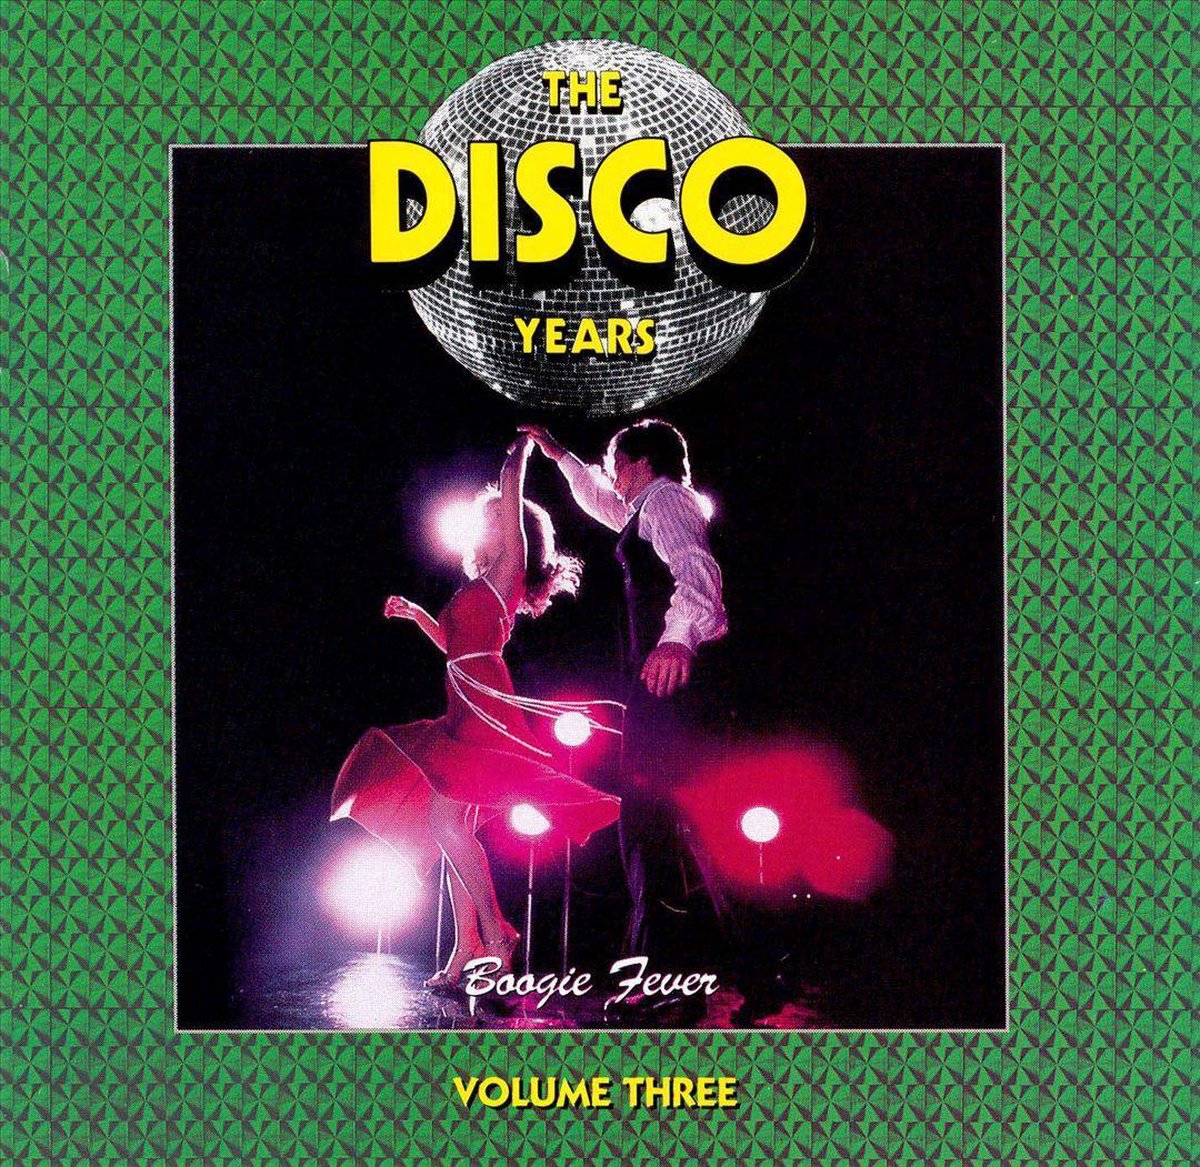 The Disco Years Vol. 3: Boogie Fever - various artists